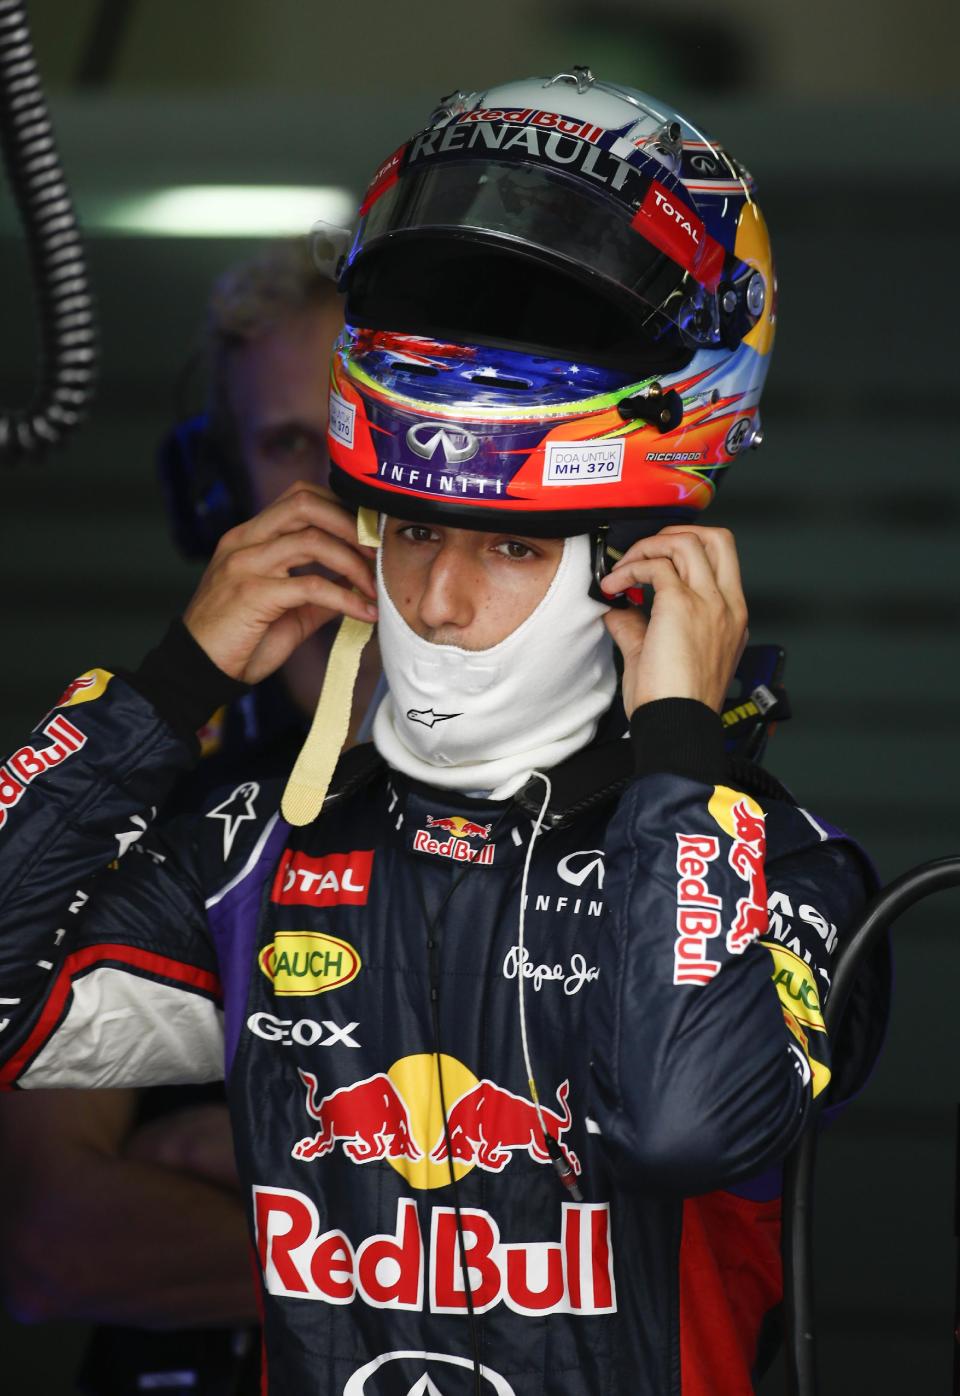 Red Bull Racing driver Daniel Ricciardo of Australia put on his helmet before the third practice session for the Malaysian Formula One Grand Prix at Sepang International Circuit in Sepang, Malaysia, Saturday, March 29, 2014. (AP Photo/Vincent Thian)